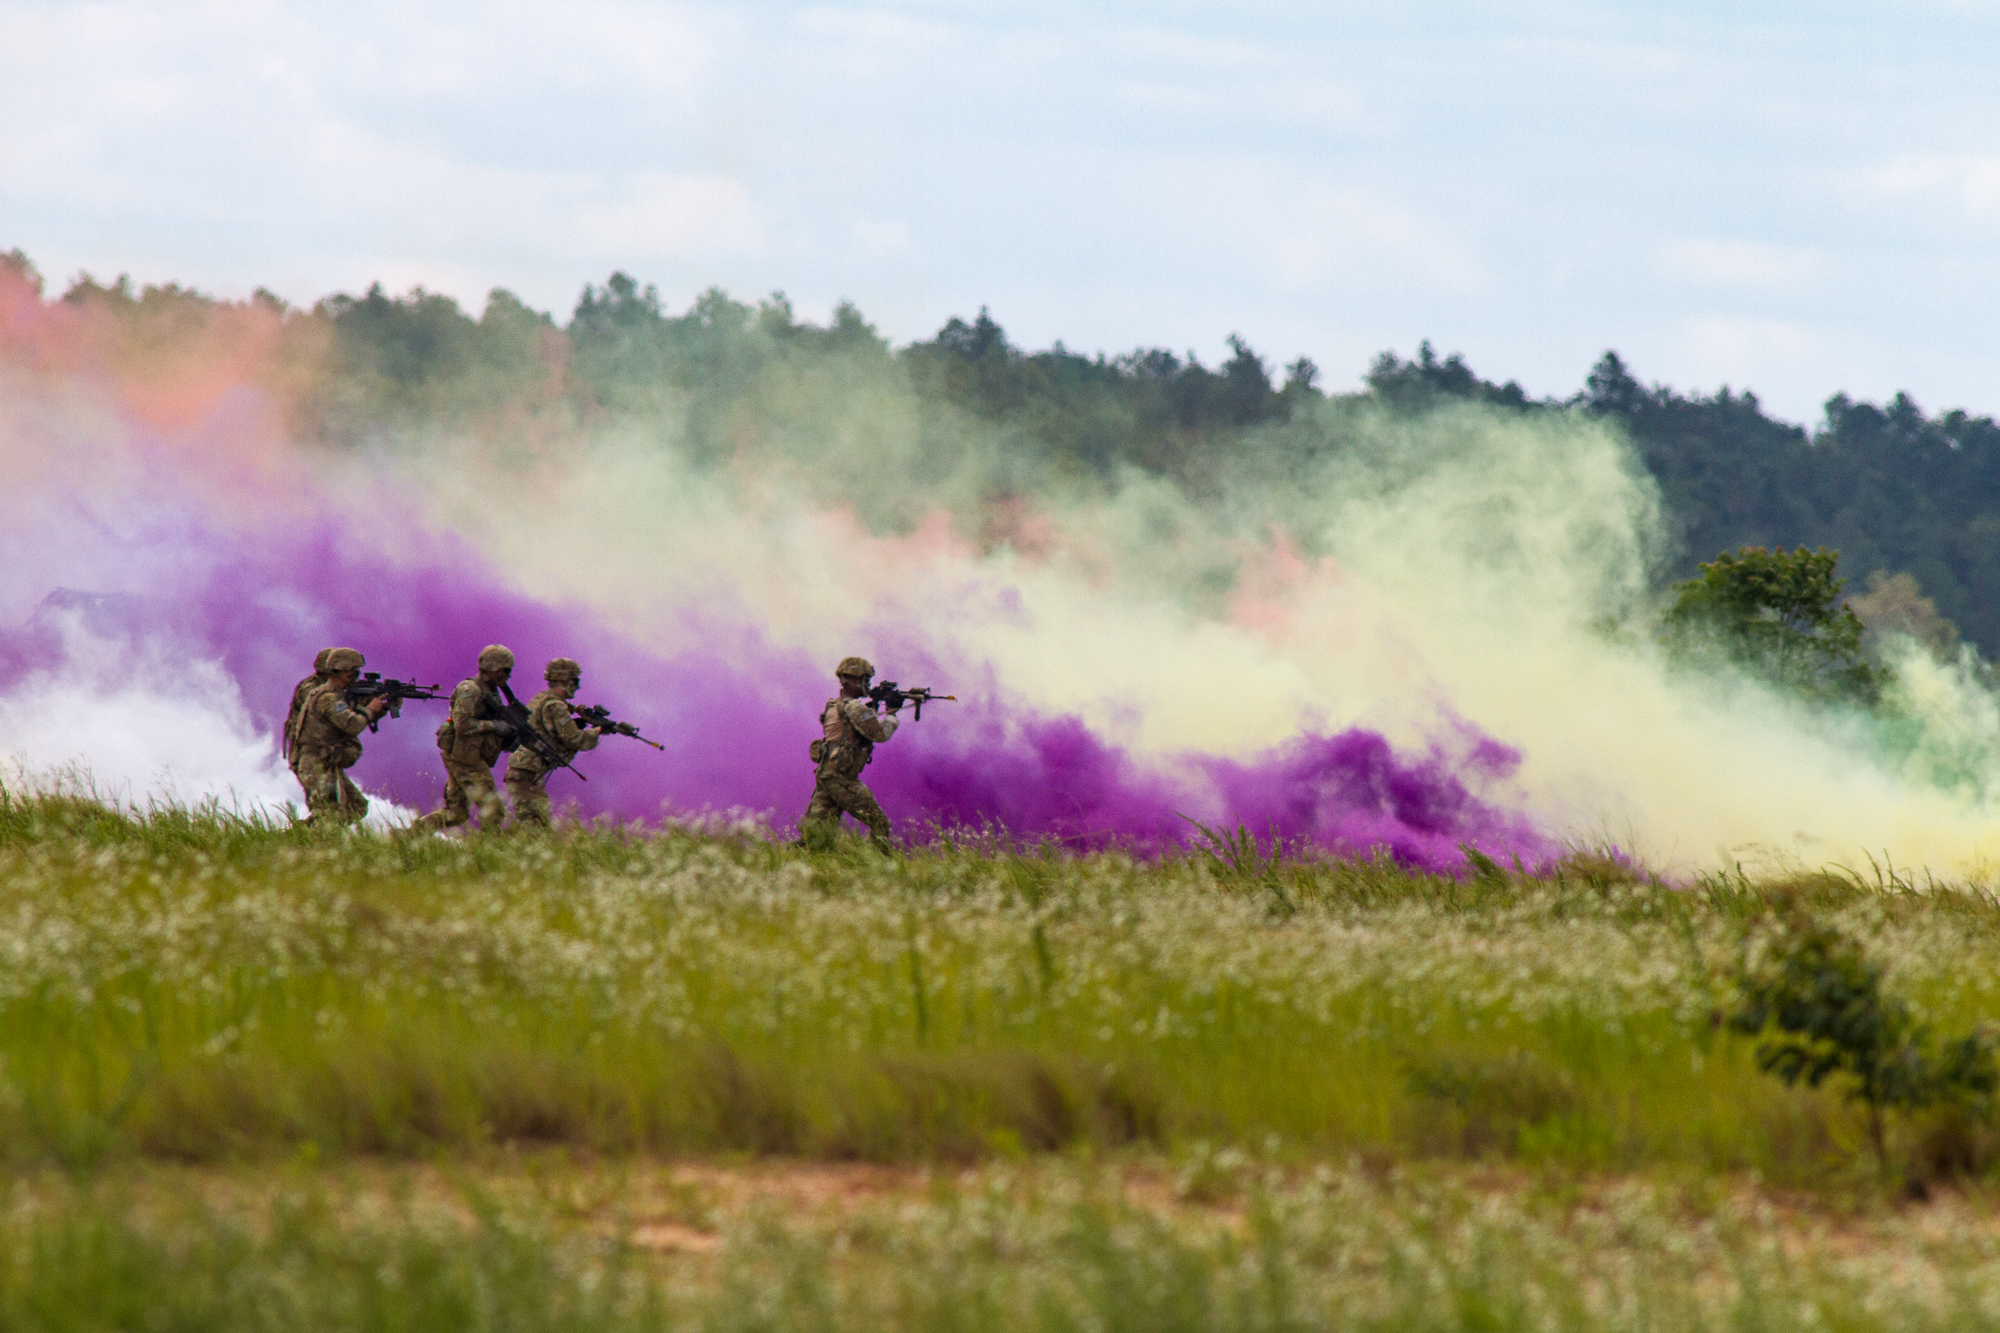  Paratroopers from the 82nd Airborne Division simulate an assault of a compound under cover of smoke as part of the Airborne Review at Sicily Drop Zone at Fort Bragg, N.C., on Thursday, May 25, 2017. 